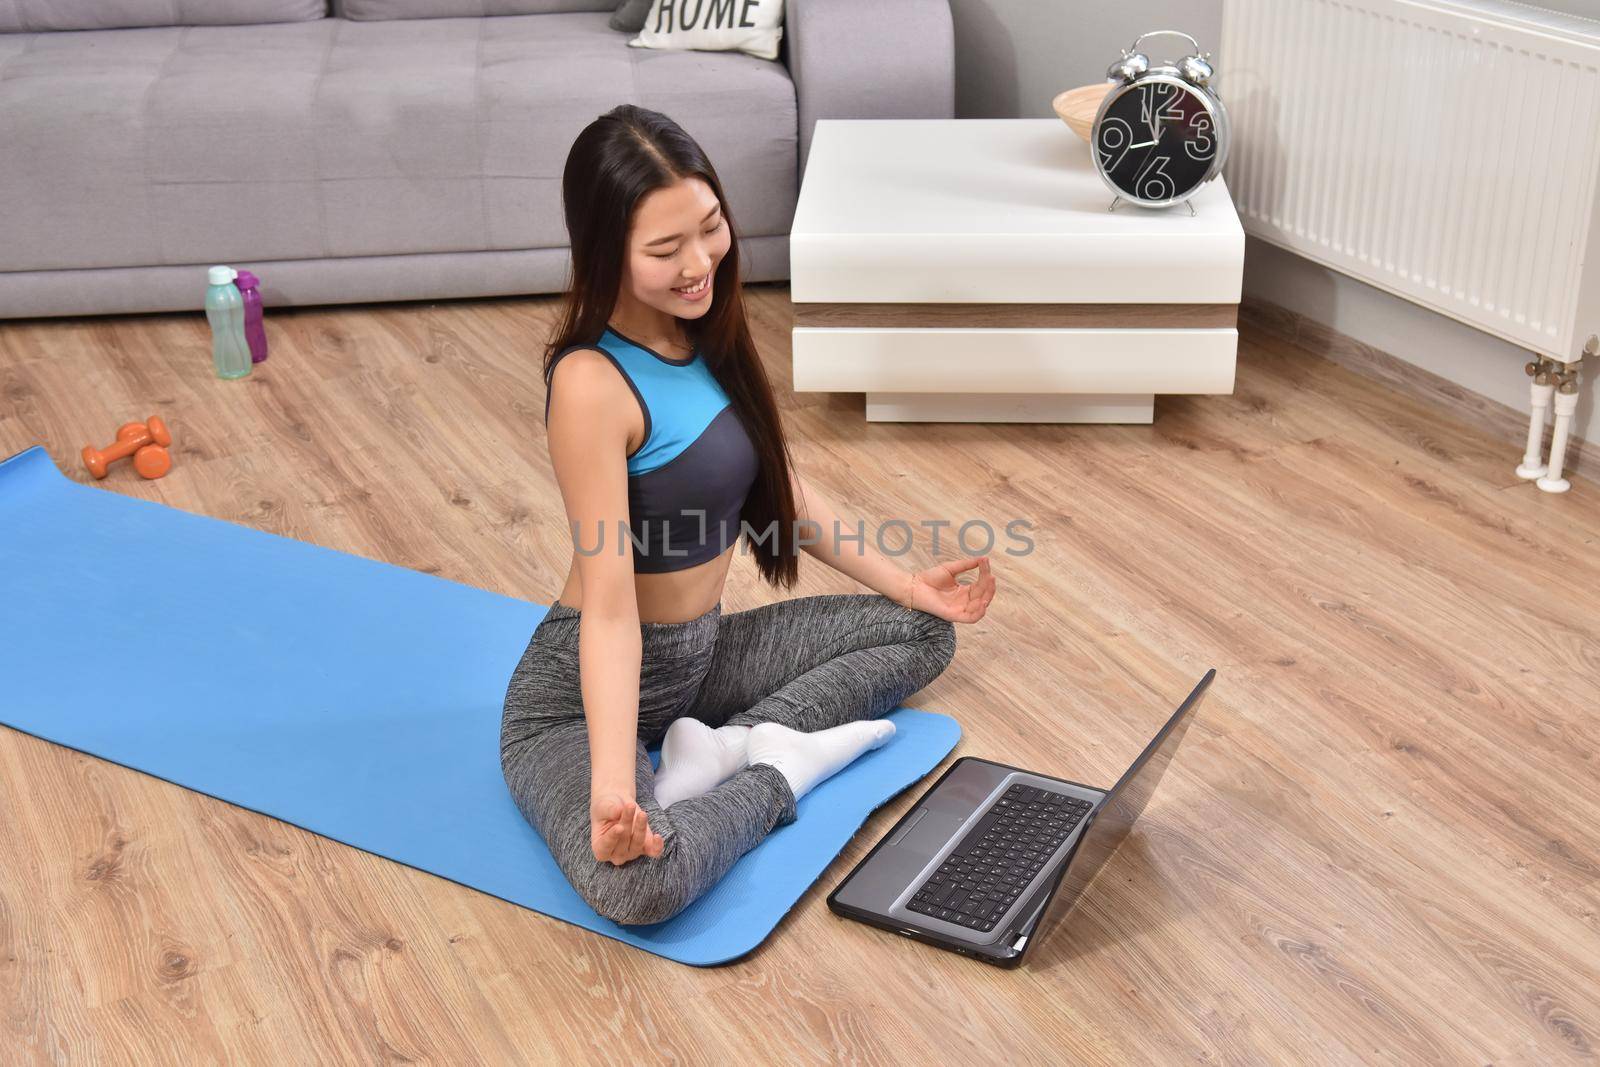 Young asian woman making yoga at home. Carantin and hobby. Home isolation. Online training. Soft focus